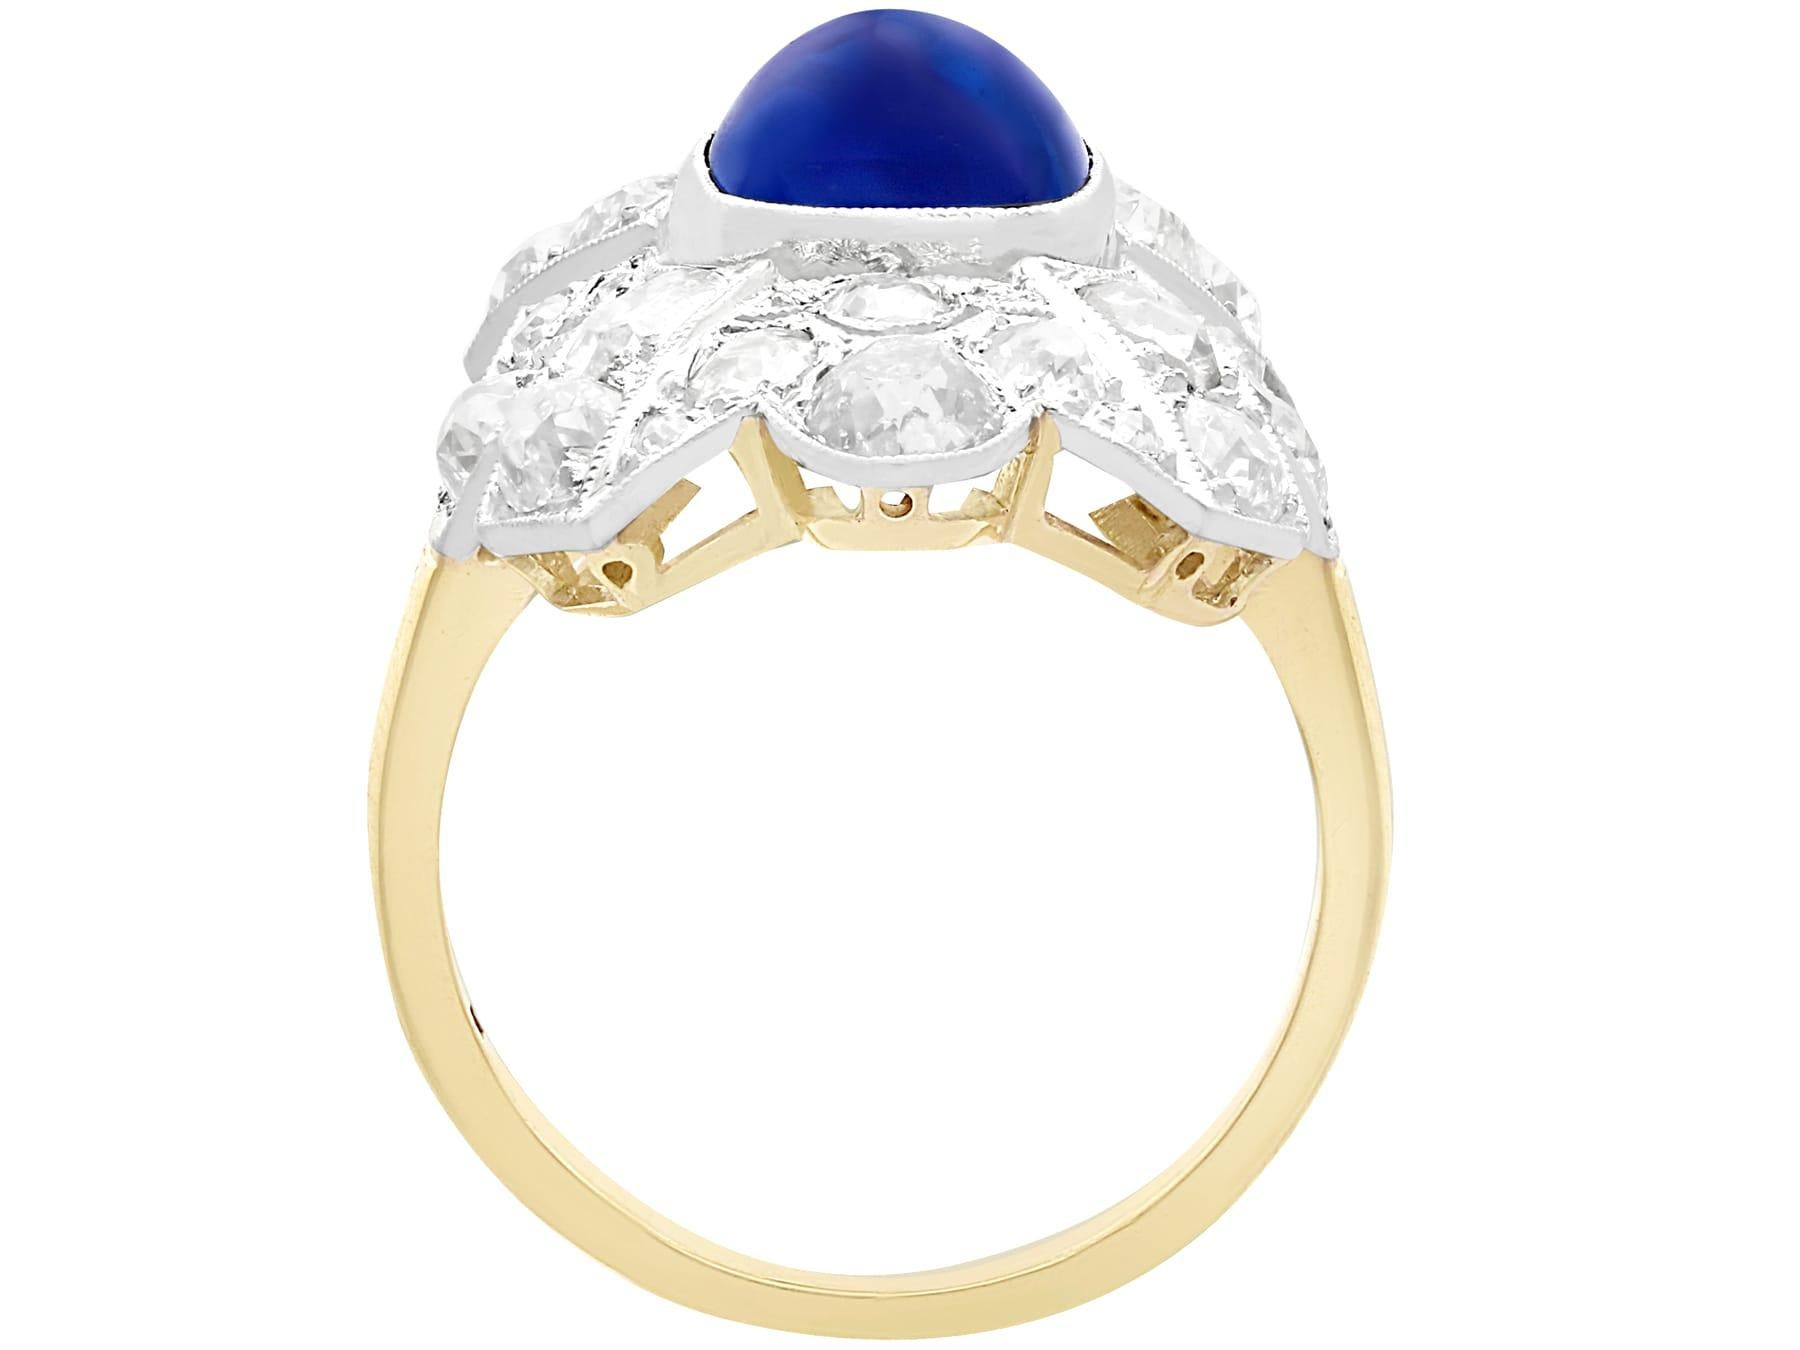 Antique 2.02 Carat Sapphire and 2.78 Carat Diamond Yellow Gold Cocktail Ring In Excellent Condition For Sale In Jesmond, Newcastle Upon Tyne